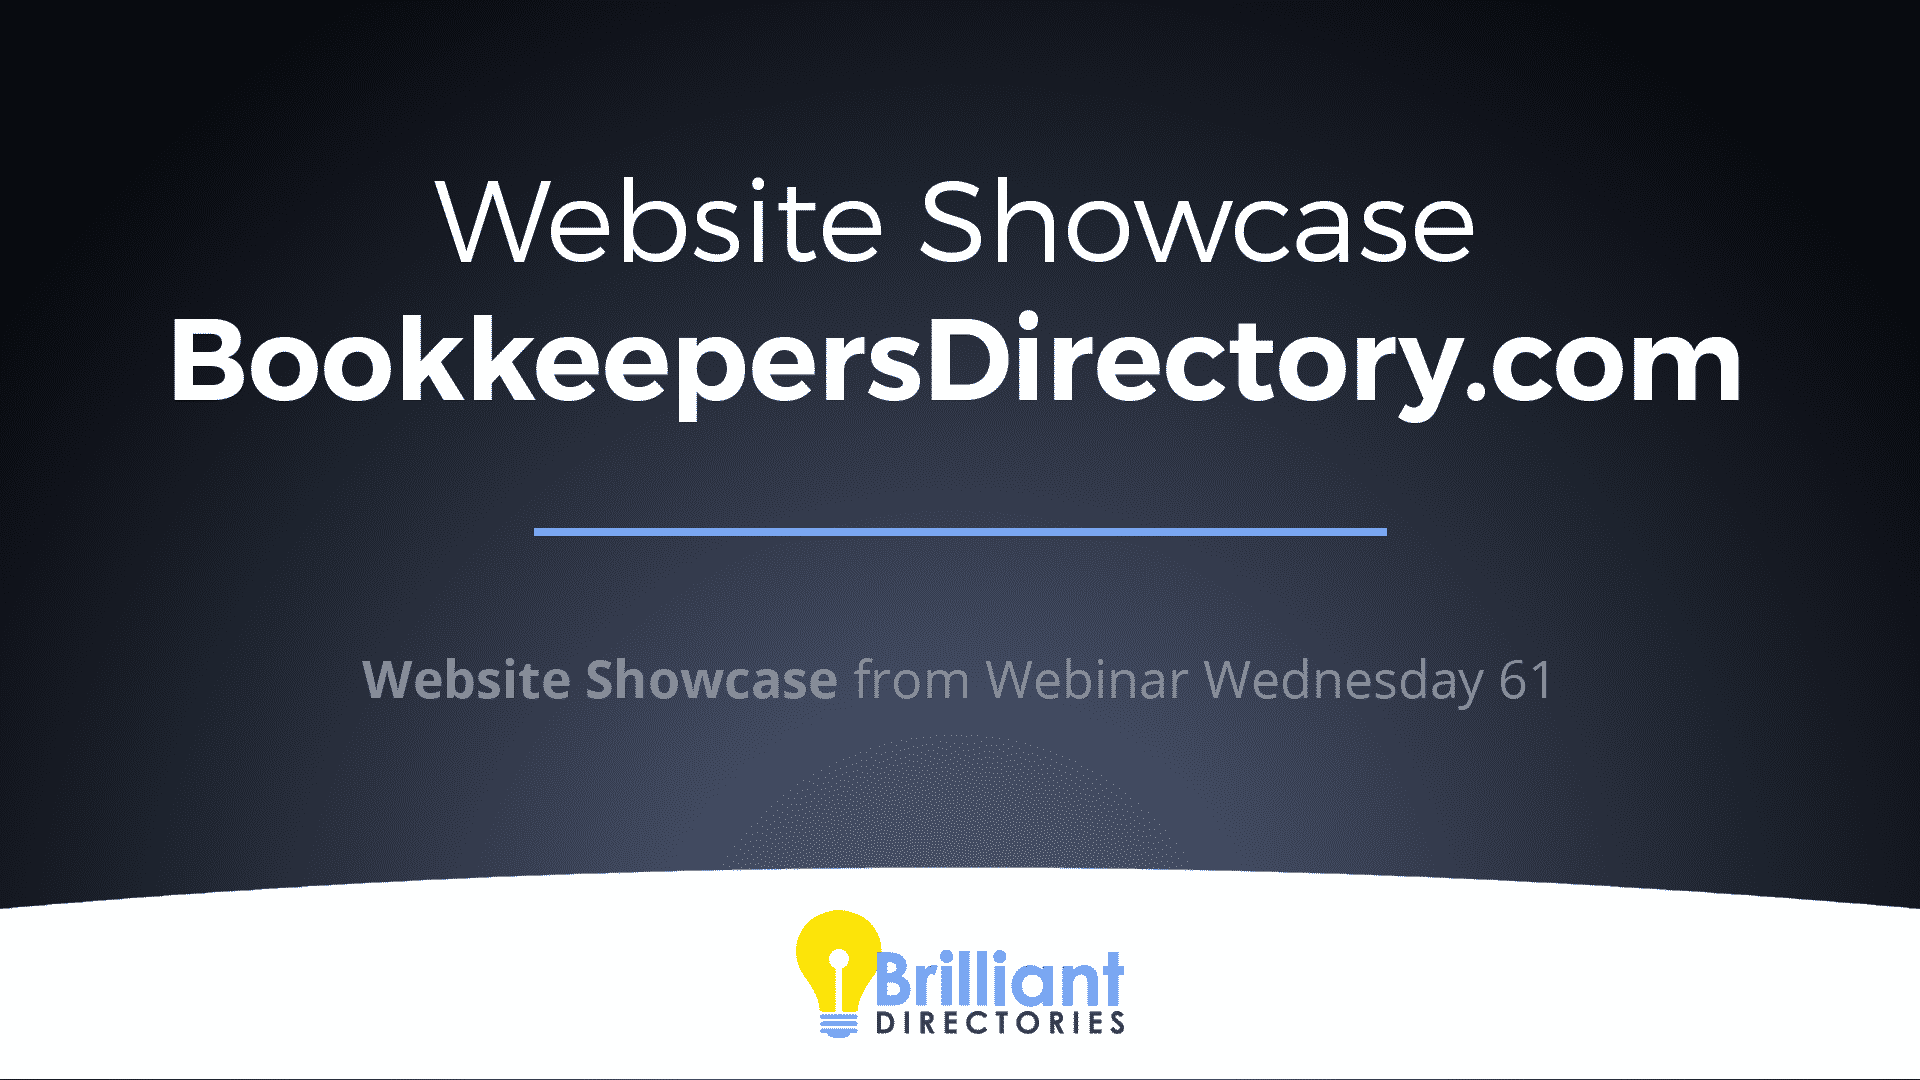 Case Study: Bookkeepers Directory powered by Brilliant Directories